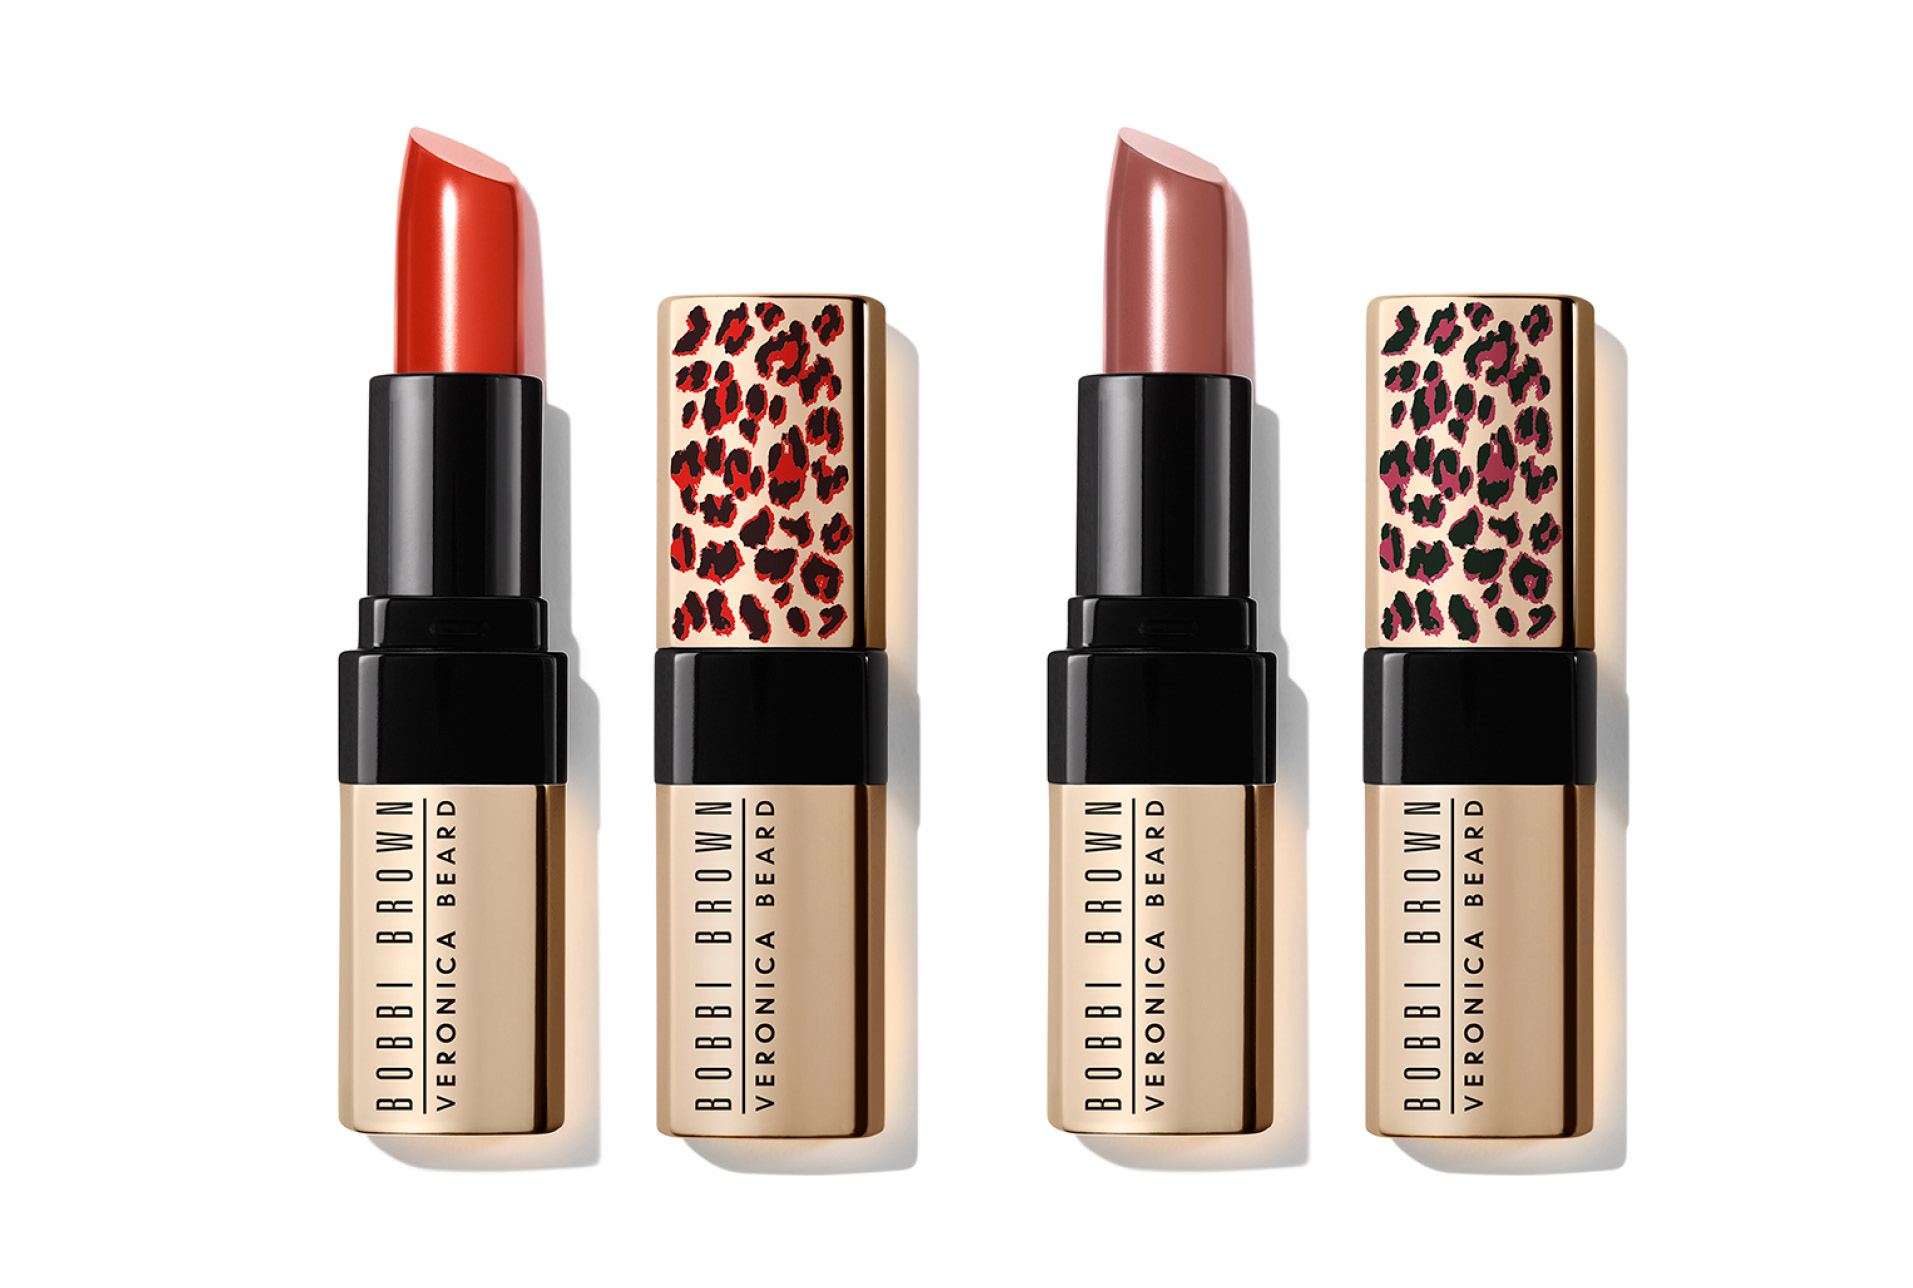 New Beauty Collection from Veronica Beard x Bobbi Brown